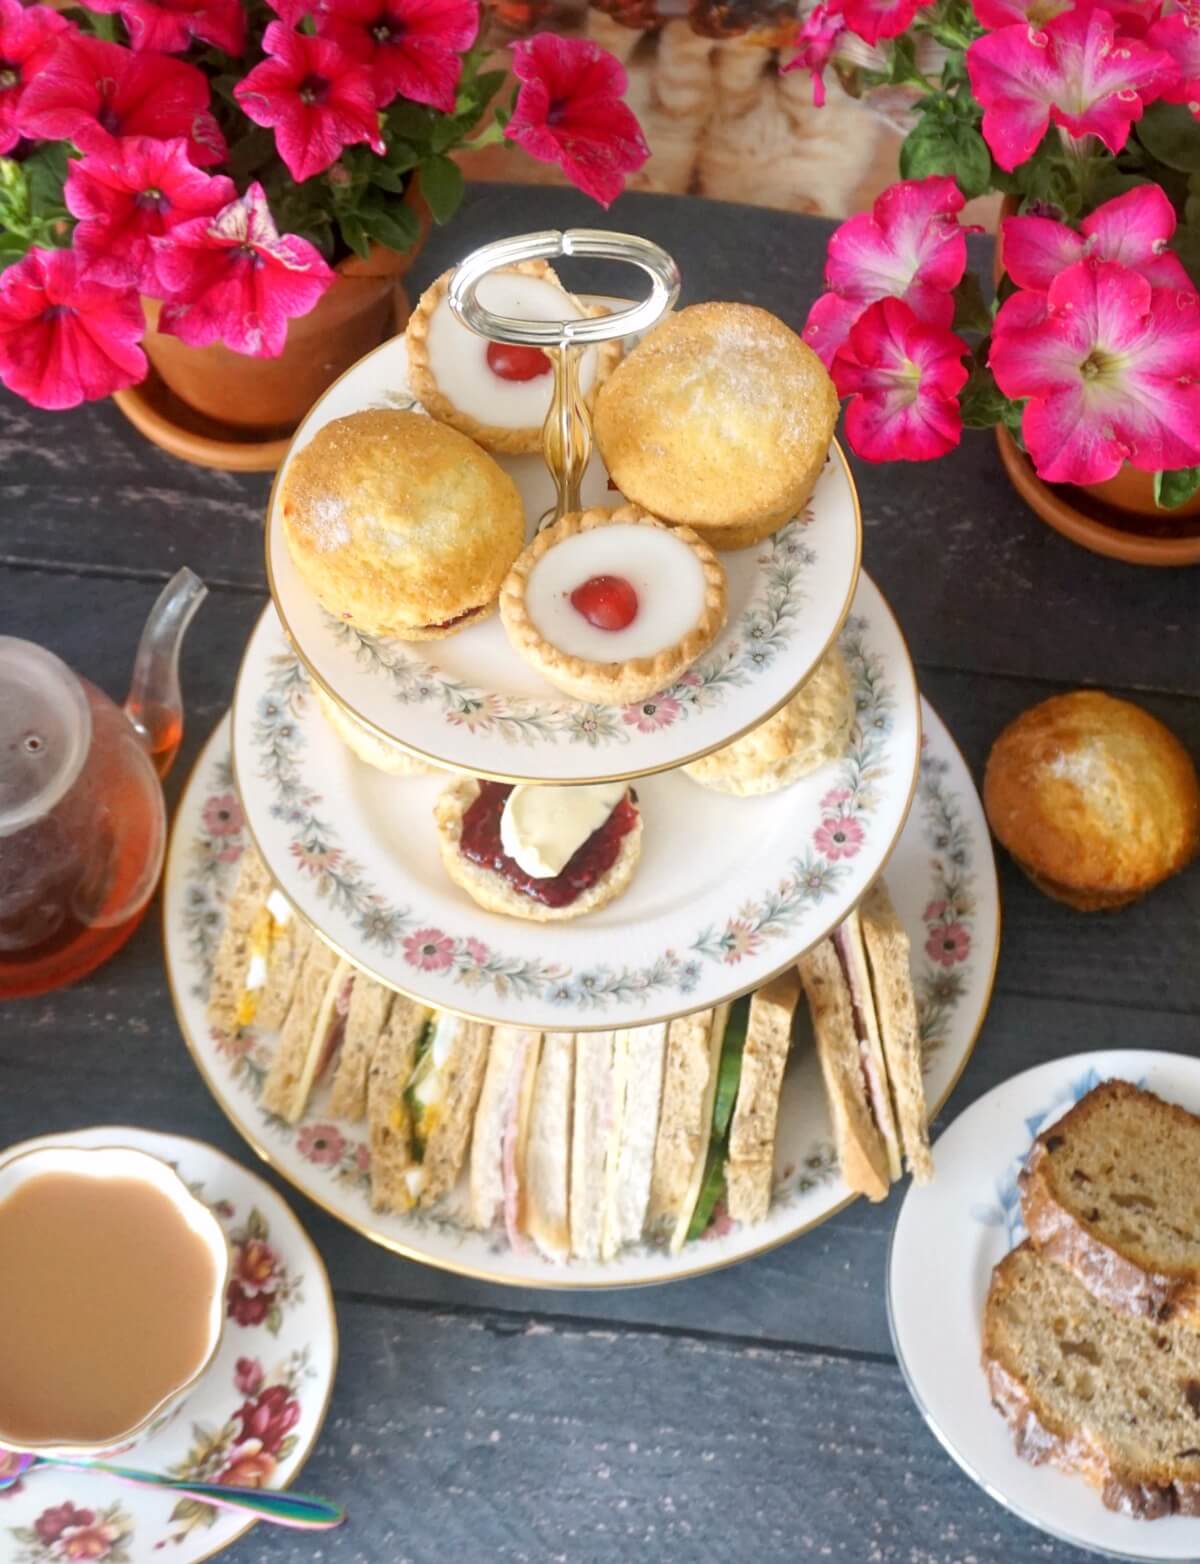 A cake stand with afternoon tea treats.